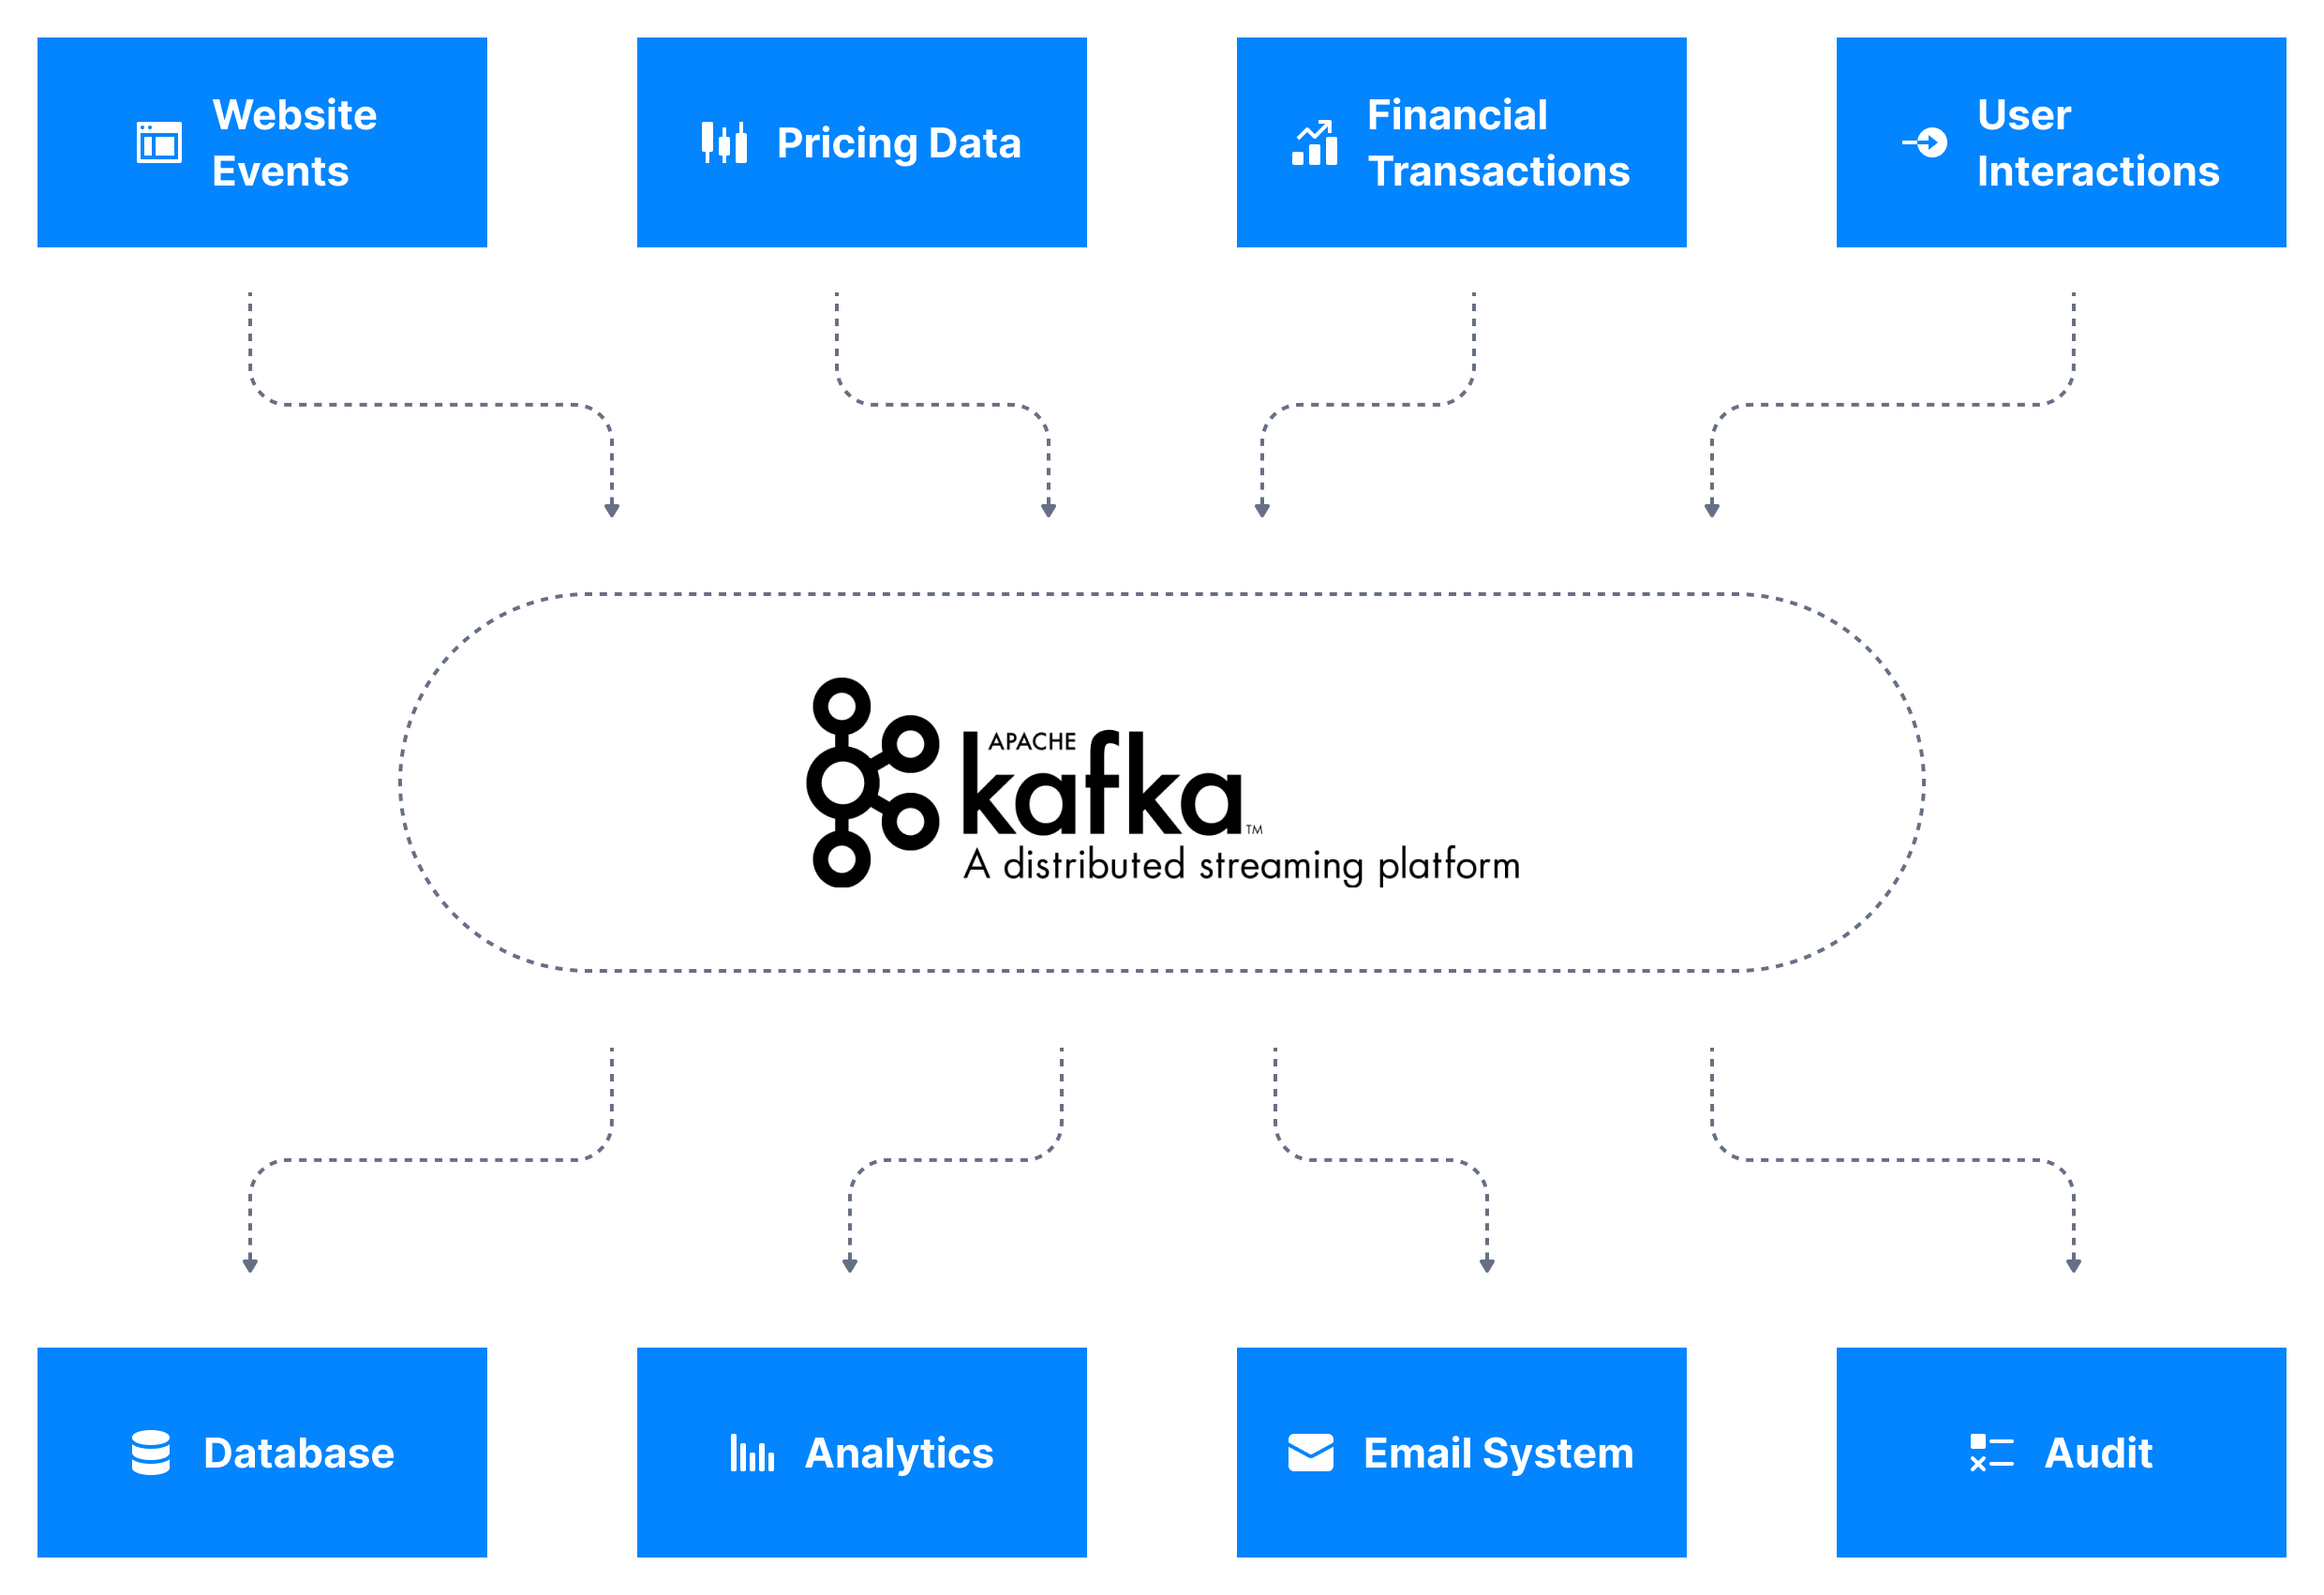 Apache Kafka allows for data from various different business applications and sources to flow into a real-time data pipeline that can process millions of events per second.